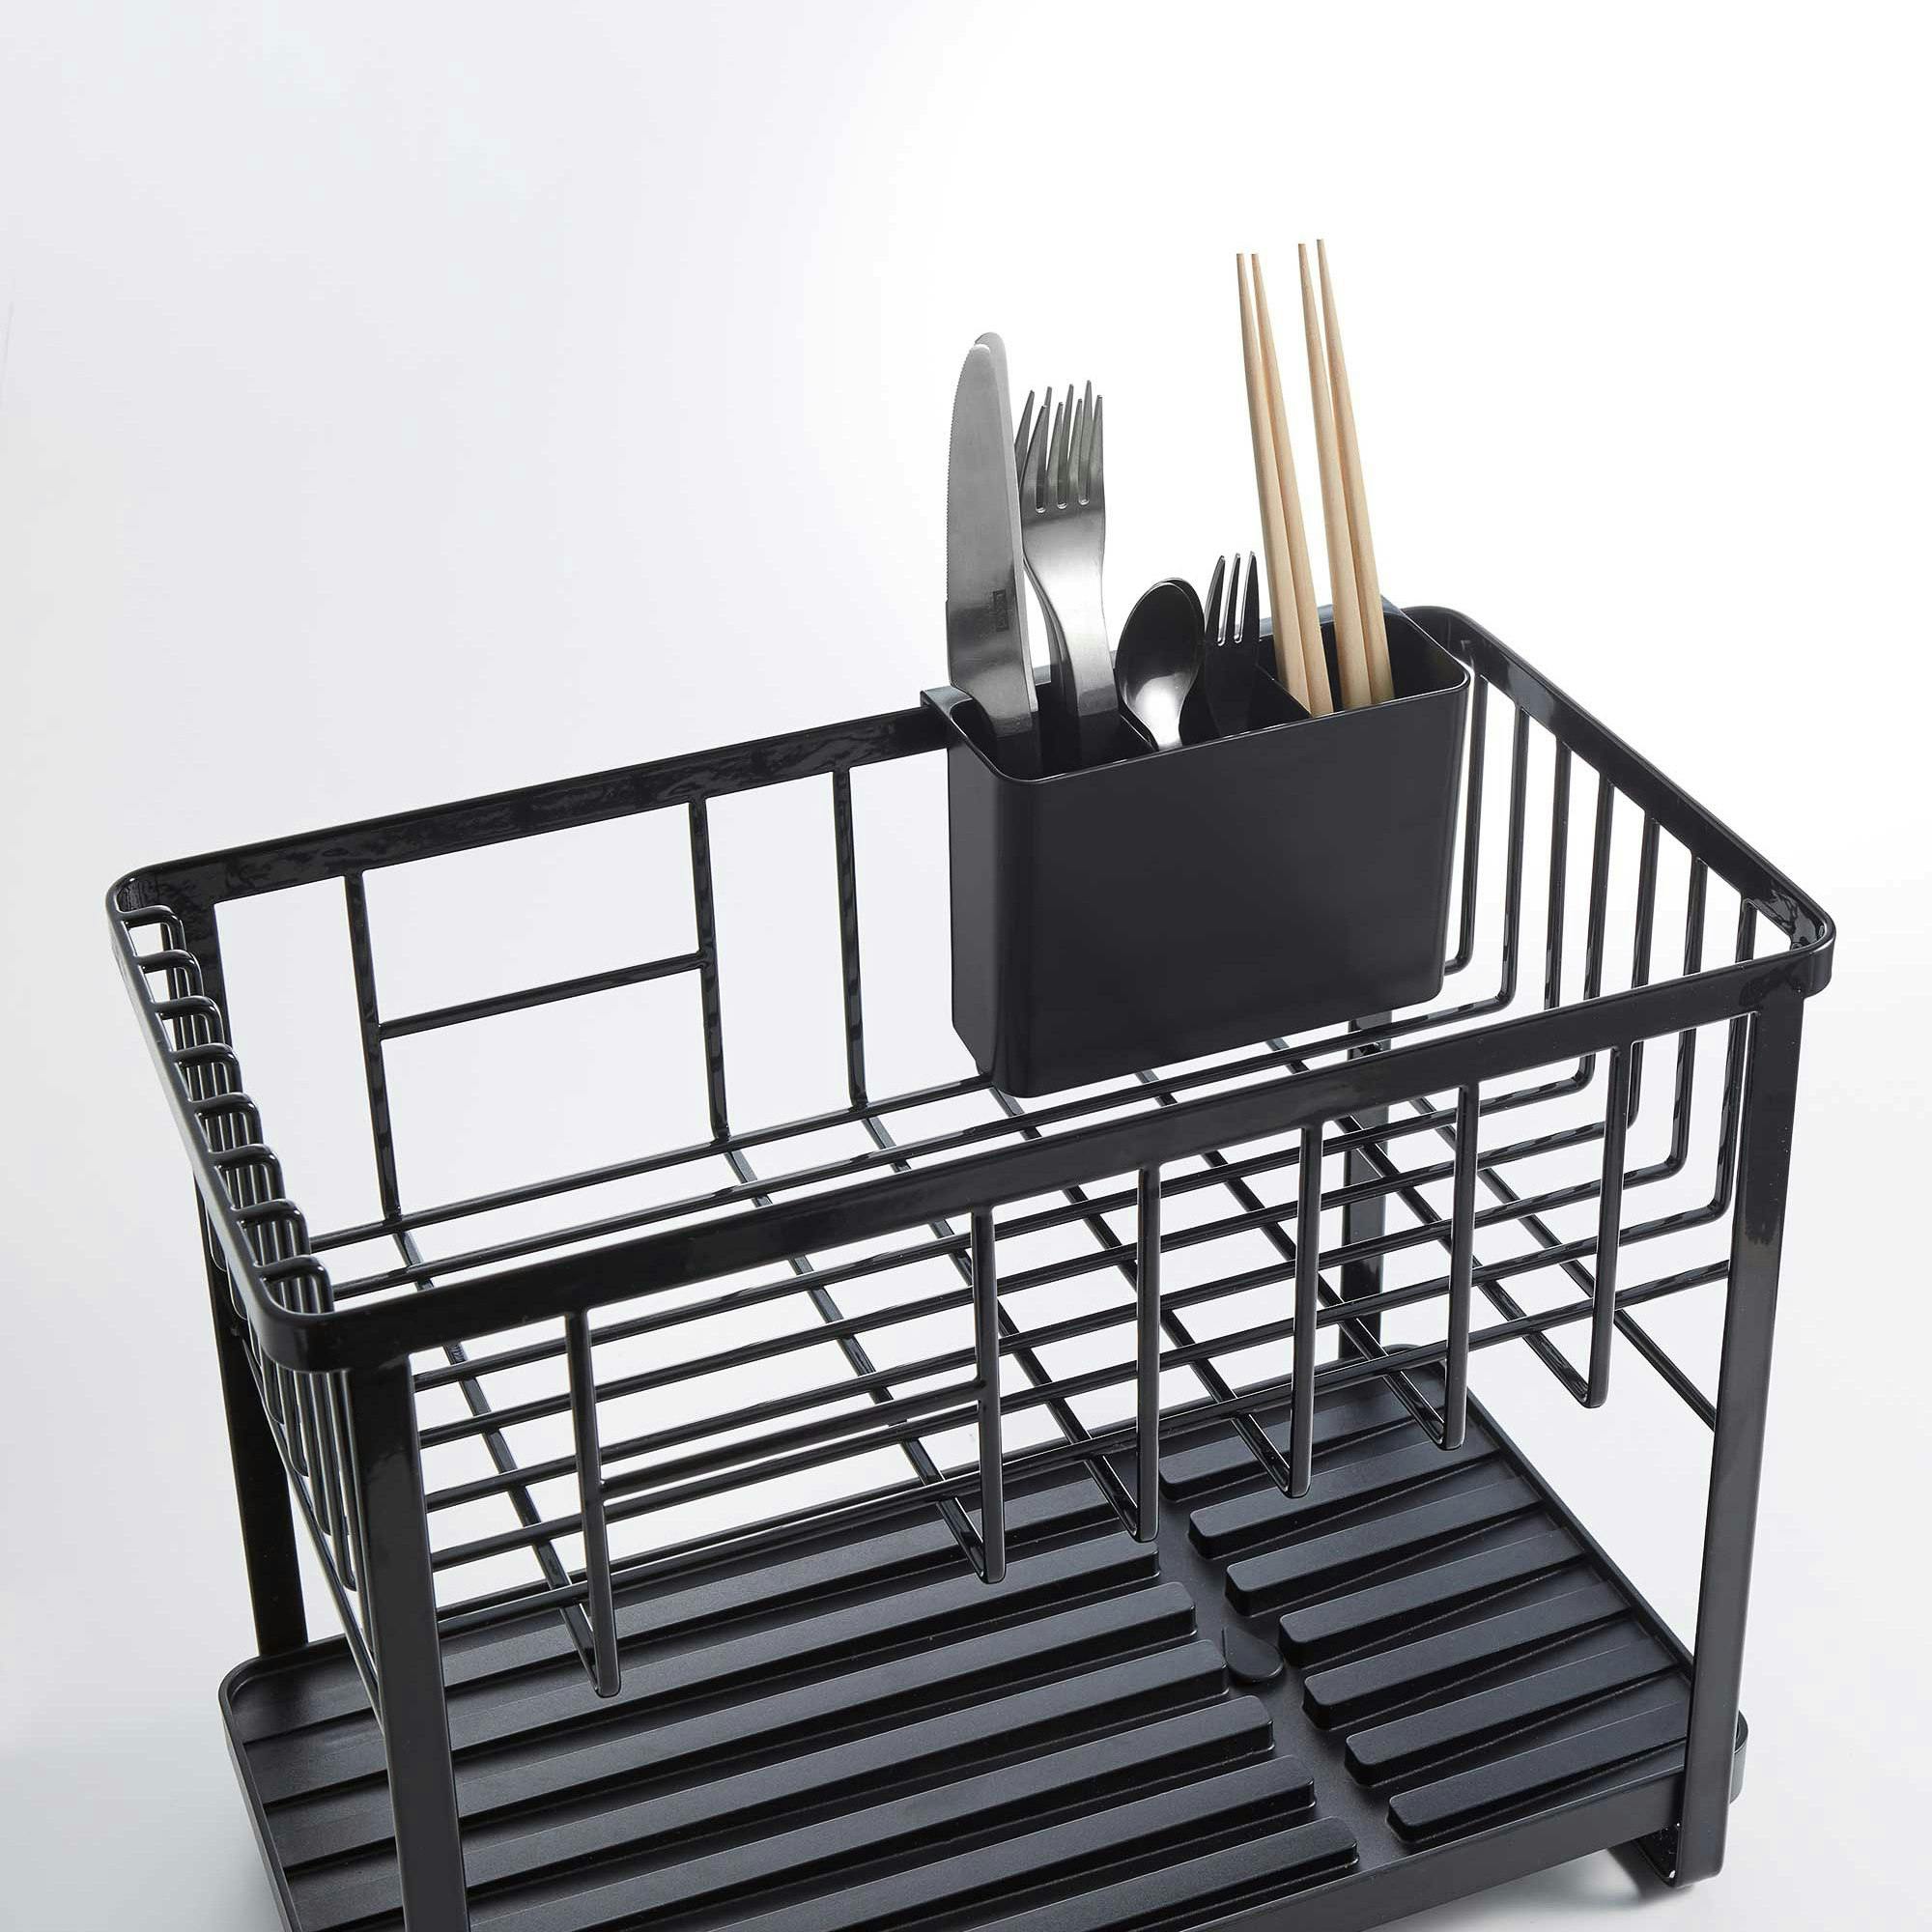 Tower Two Tier (Double Decker) Two Level Steel Dish Rack (White)